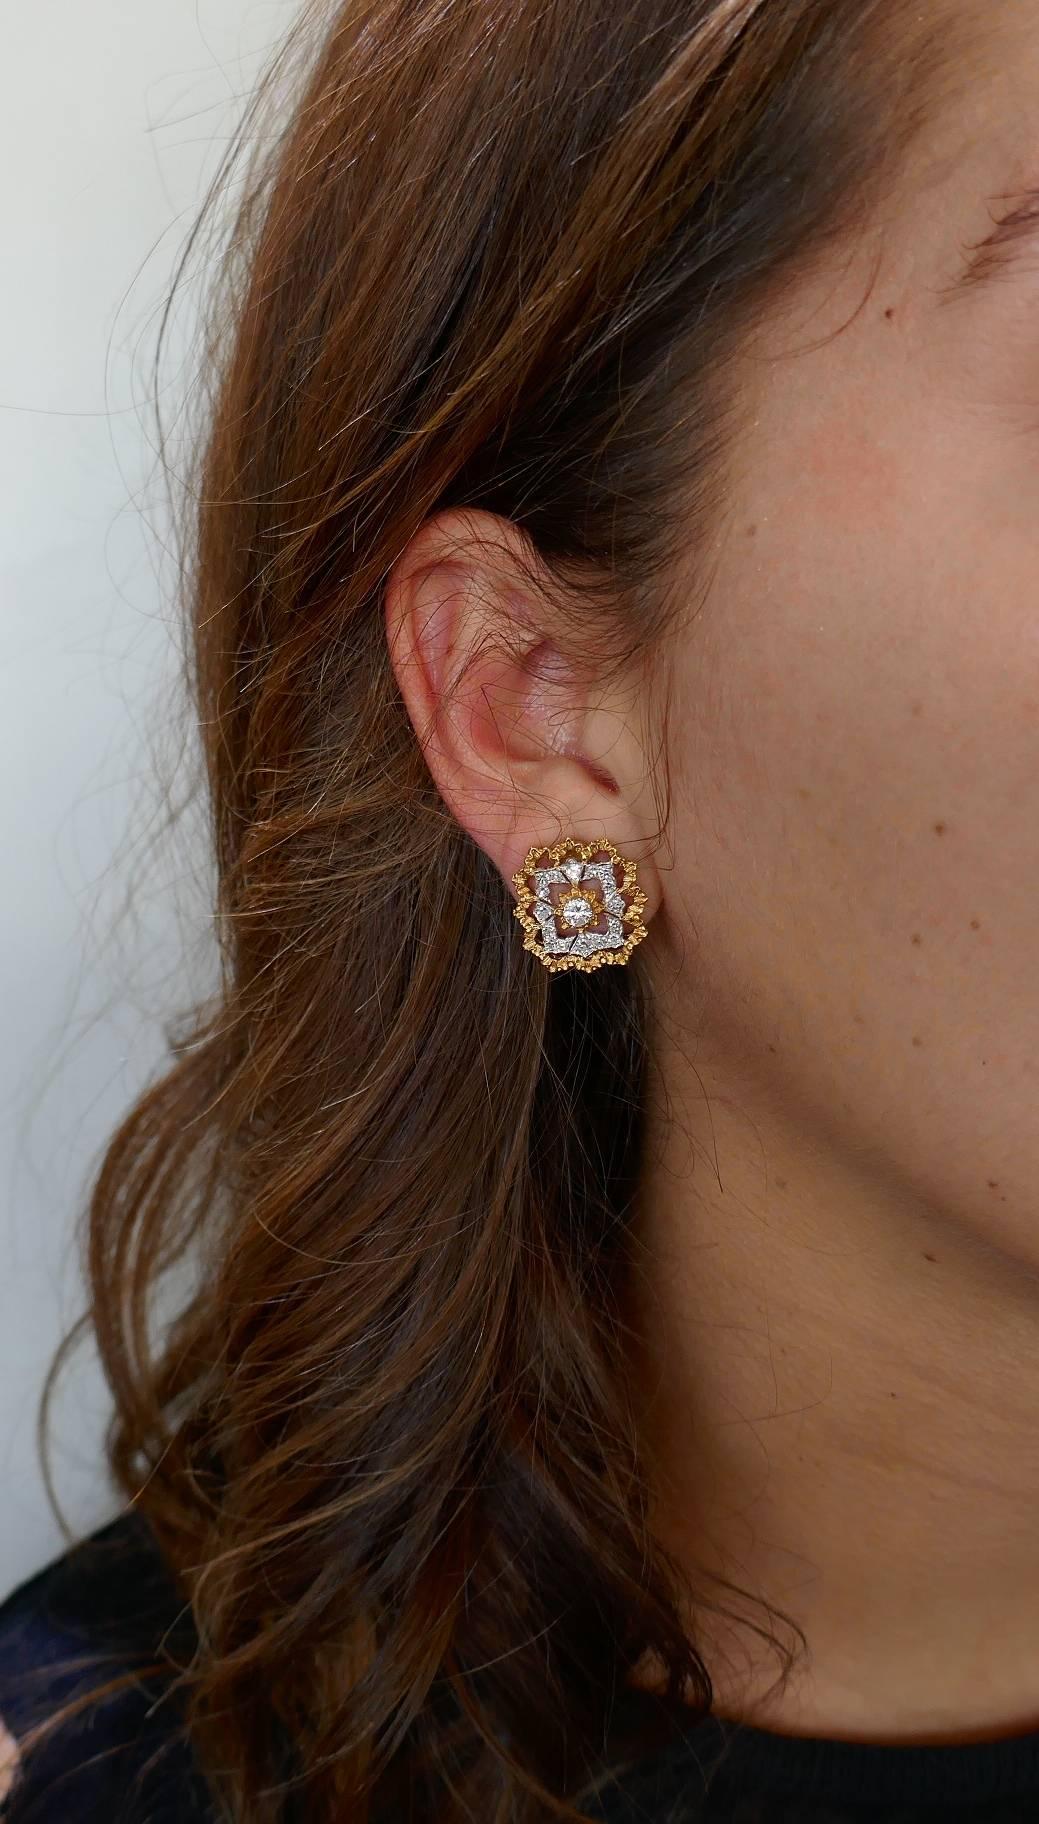 Classy and timeless ear clips created by Buccellati in Italy in the 1980s. 
Feminine, wearable and chic, the earrings are a great addition to your jewelry collection.
Made of 18 karat yellow and white gold and set with round brilliant cut diamonds